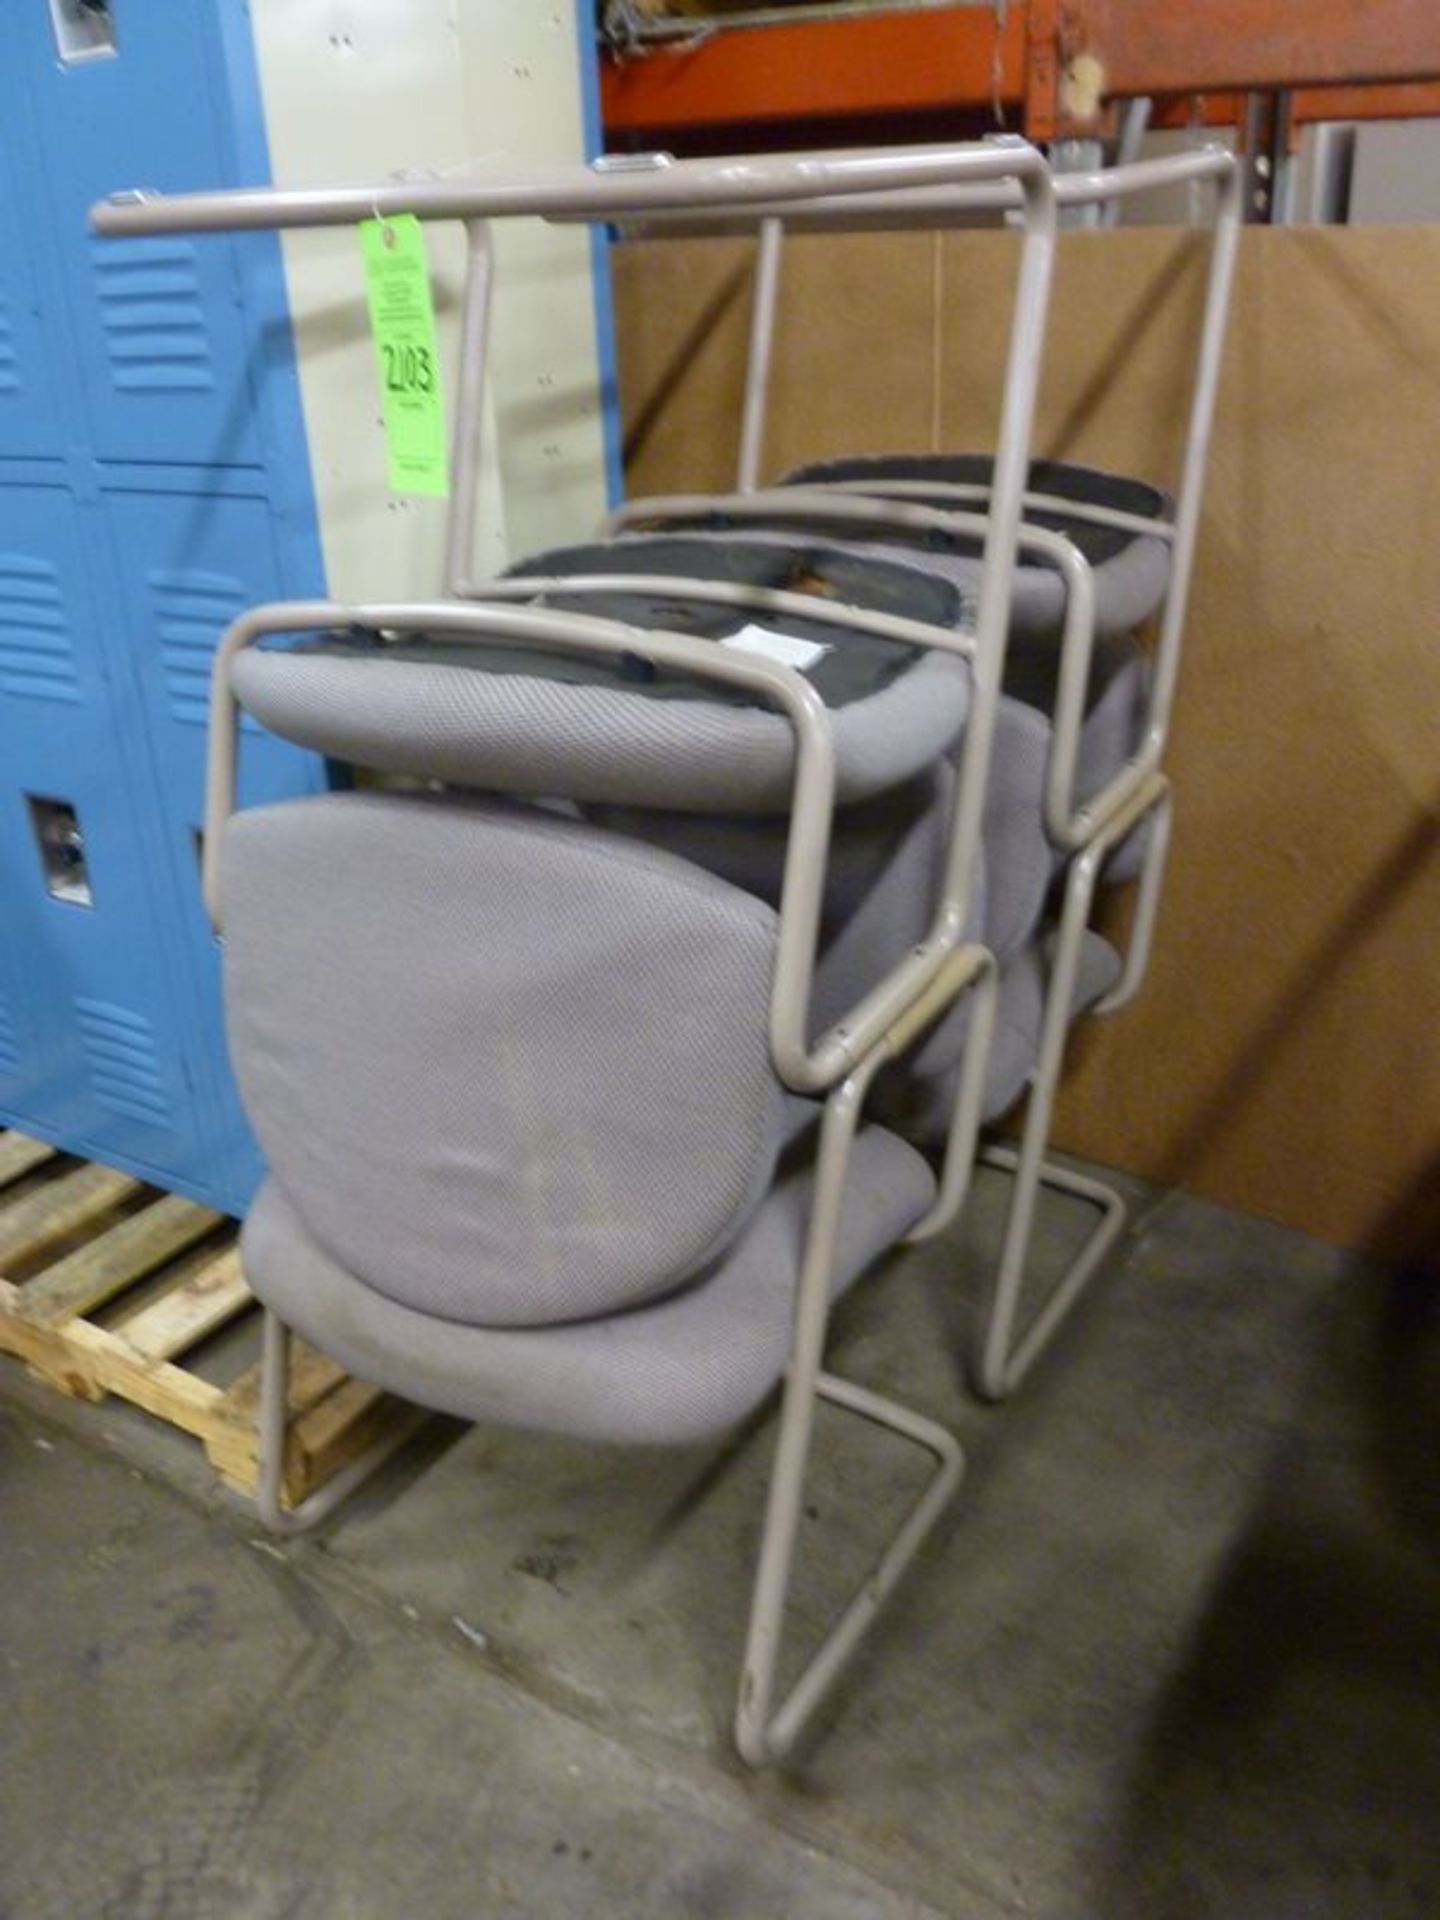 4 STEELCASE OFFICE CHAIRS (LOCATED AT 6901 ARDMORE AVE. FORT WAYNE, IN 46809)